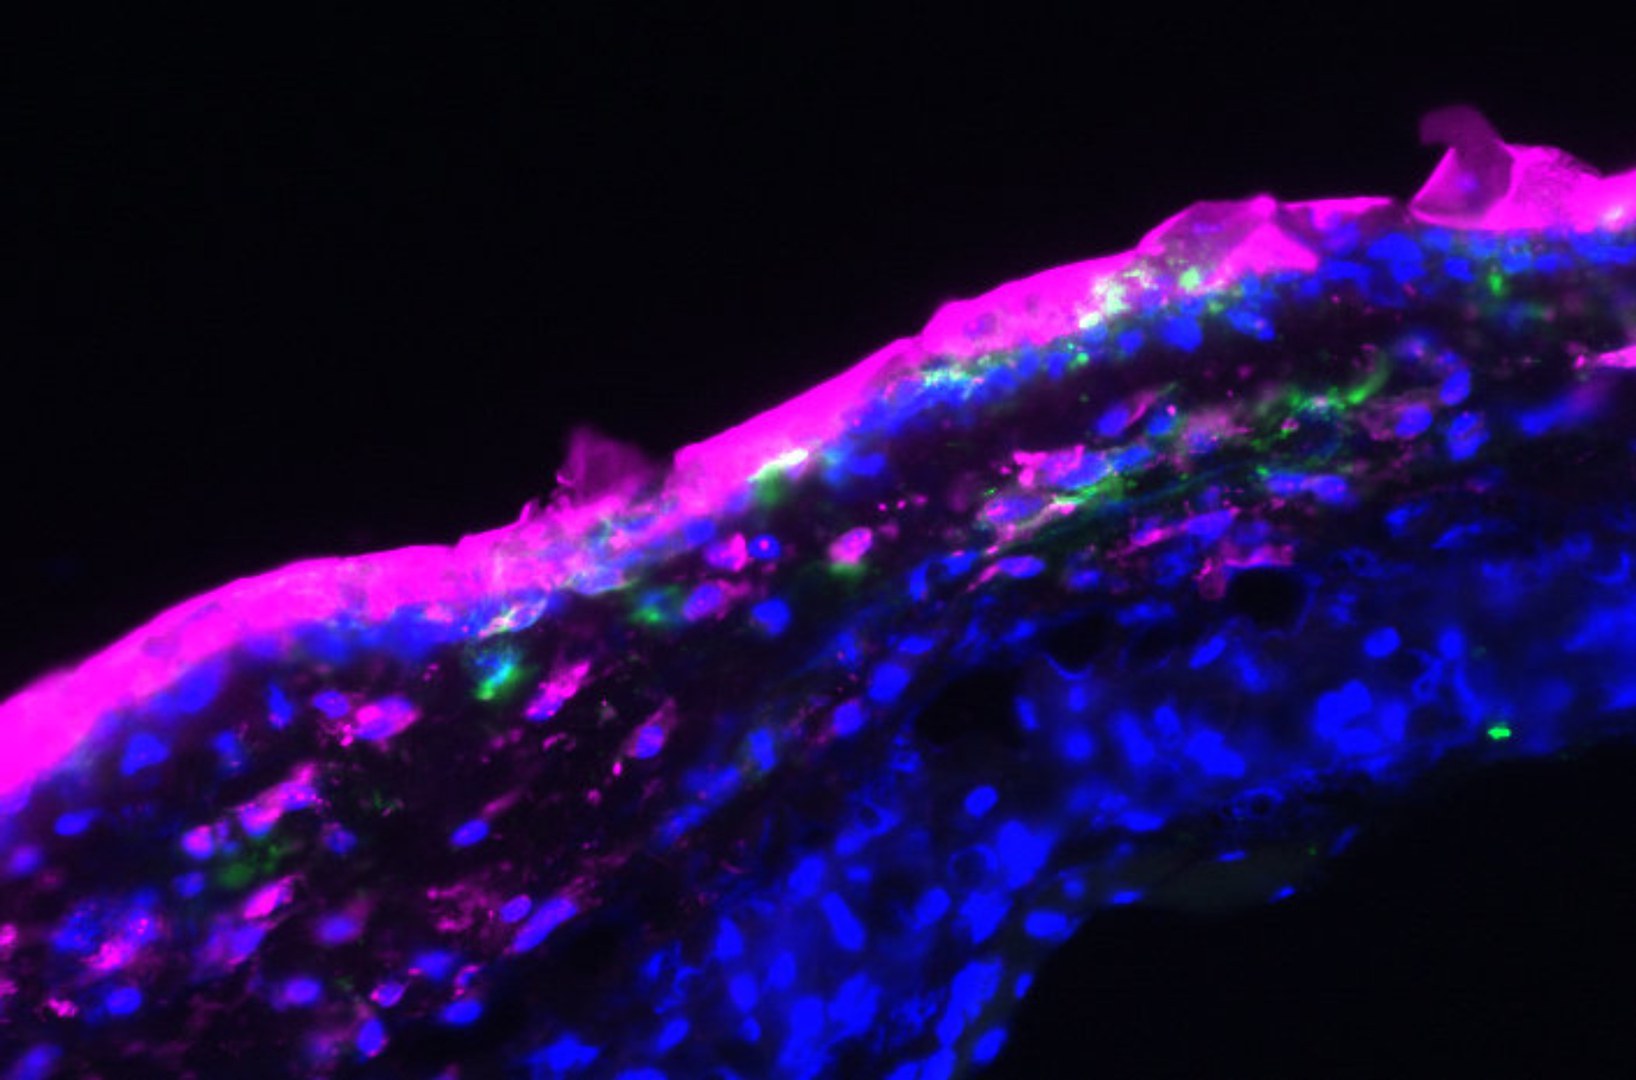 Fluorescence microscopic imaging of the skin treated with the aptamer cream: - The aptamers (here marked in pink) were applied to the top layer of the skin in the form of an ointment and also penetrate into the deeper dermal layers (nucleus: blue; antigen-presenting cells: green).